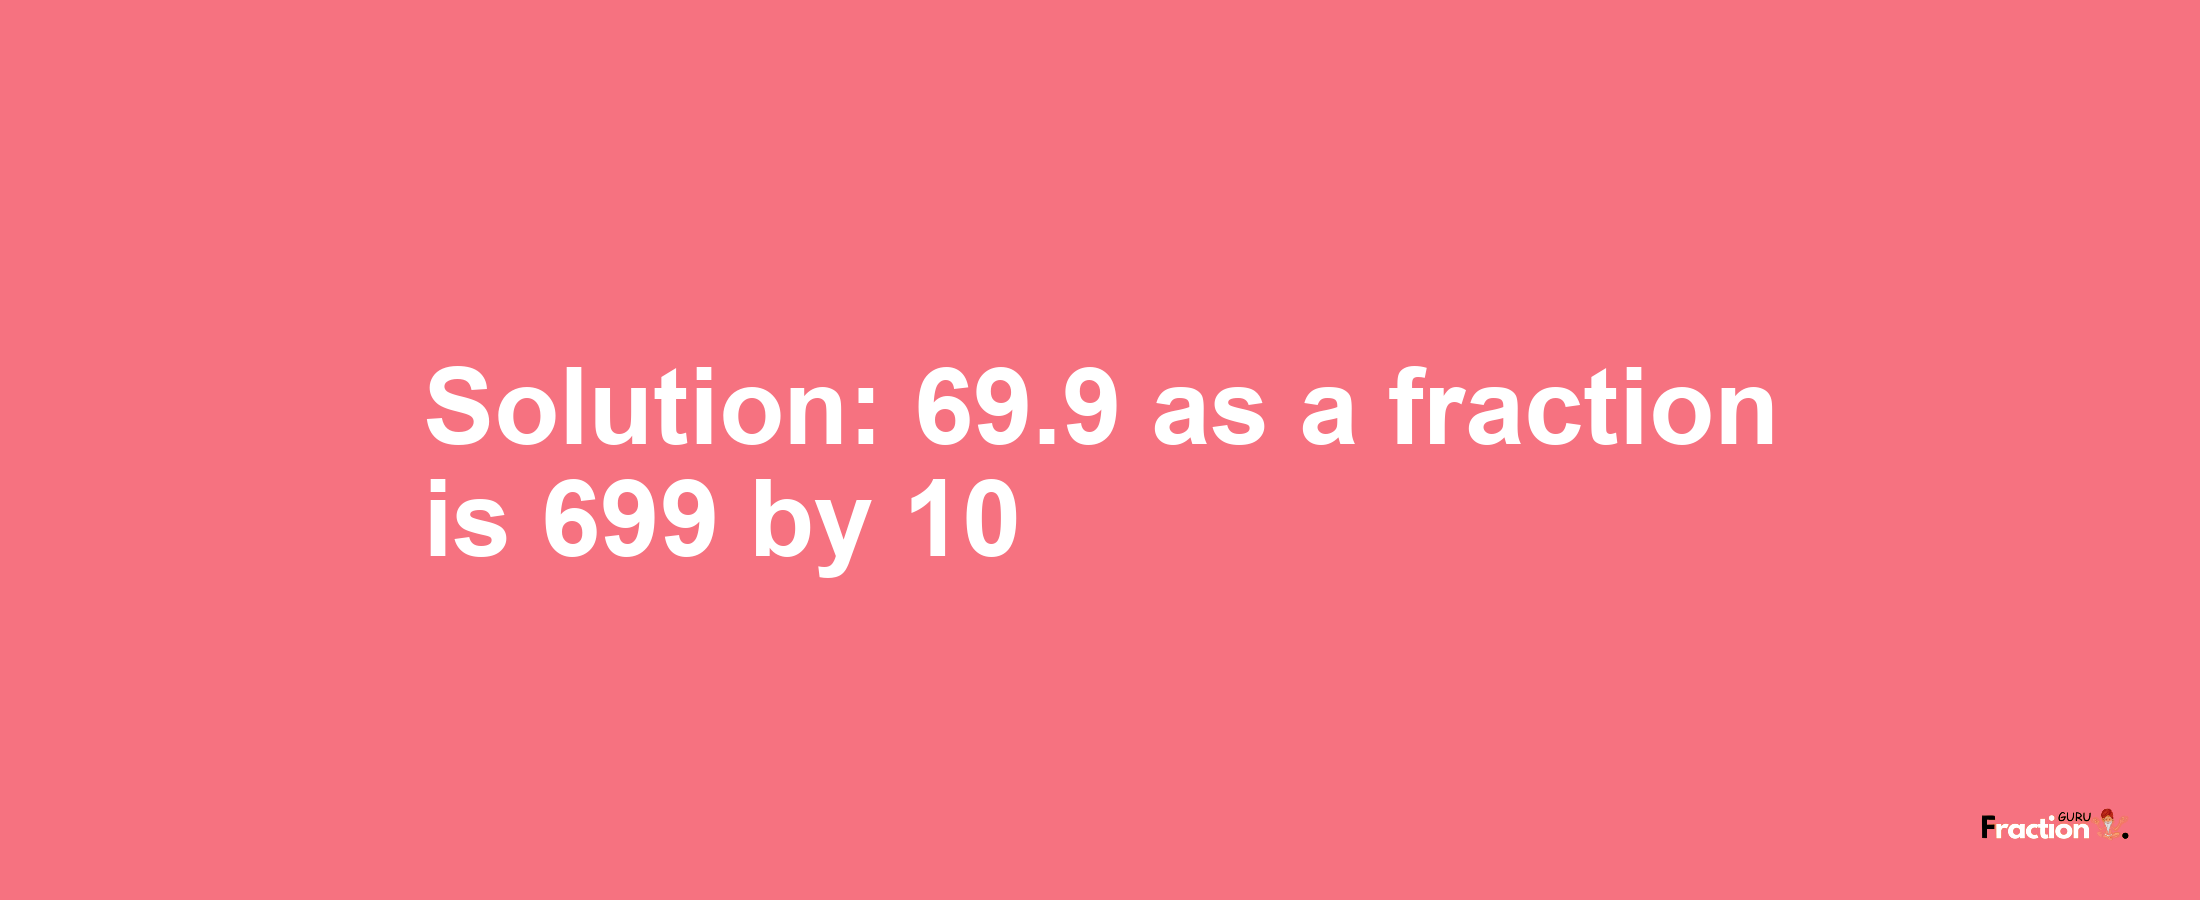 Solution:69.9 as a fraction is 699/10